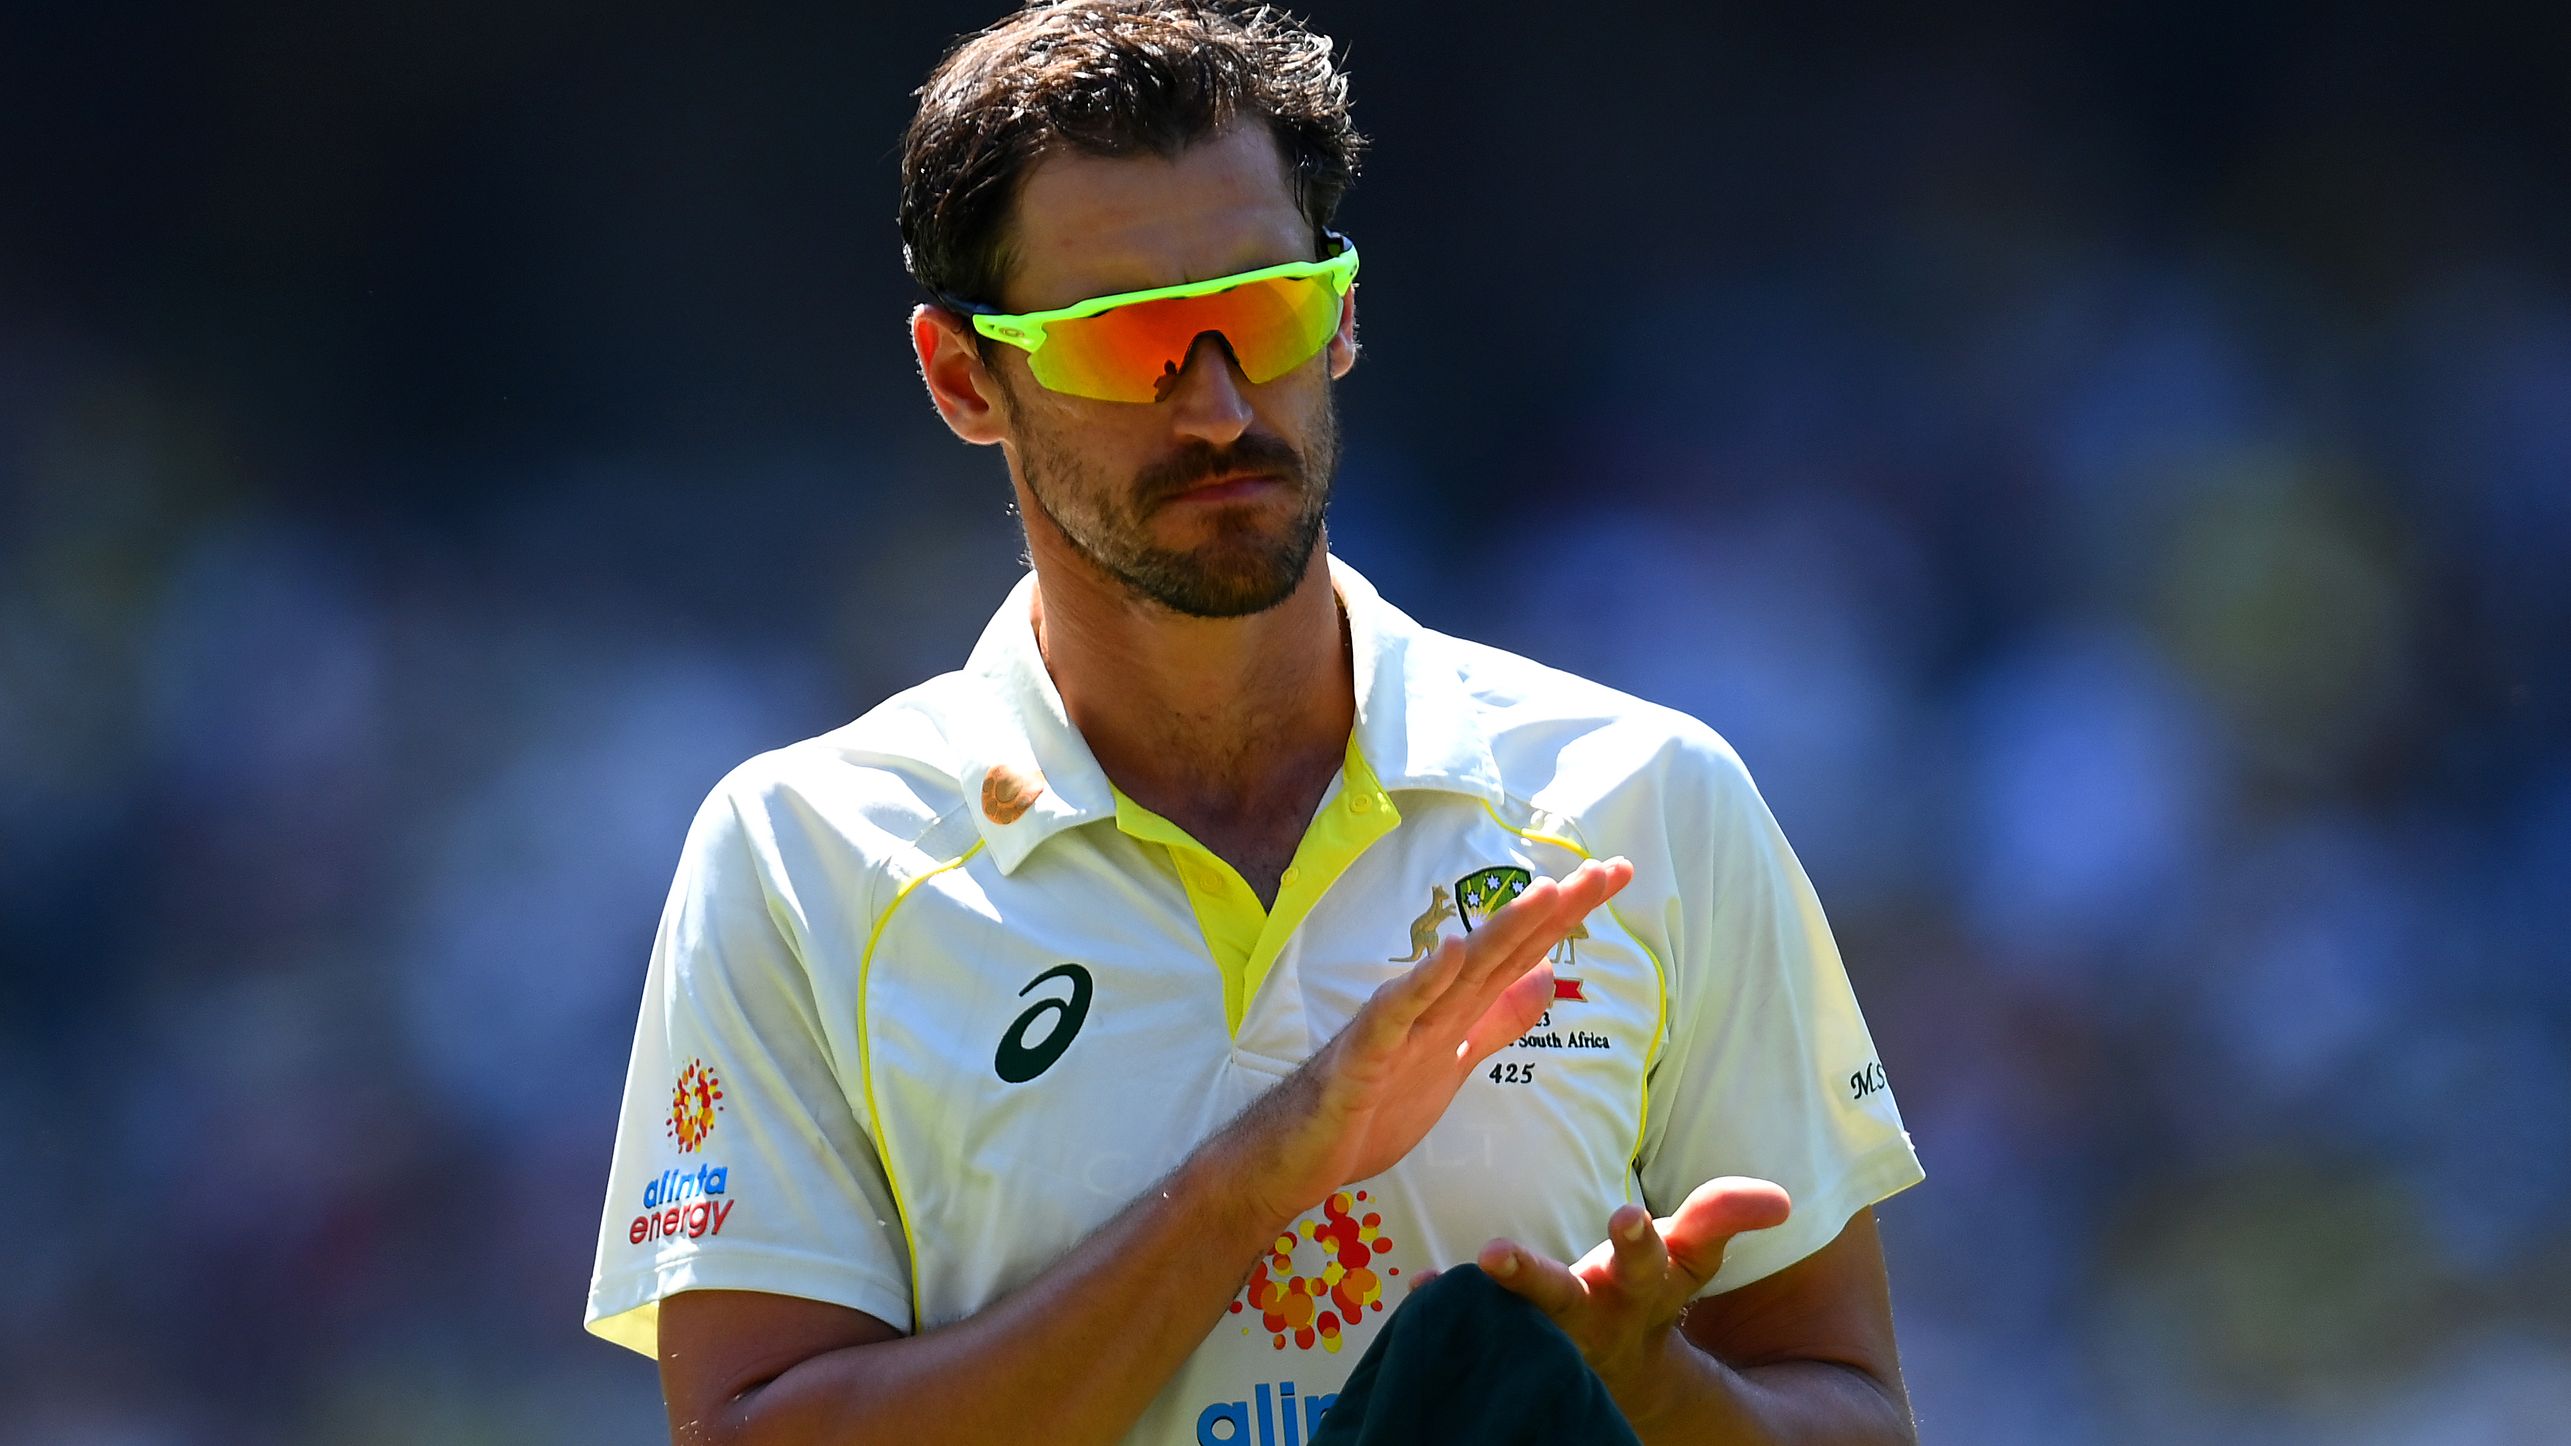 MELBOURNE, AUSTRALIA - DECEMBER 26: Mitchell Starc of Australia claps a tribute to Shane Warne during day one of the Second Test match in the series between Australia and South Africa at Melbourne Cricket Ground on December 26, 2022 in Melbourne, Australia. (Photo by Quinn Rooney/Getty Images)